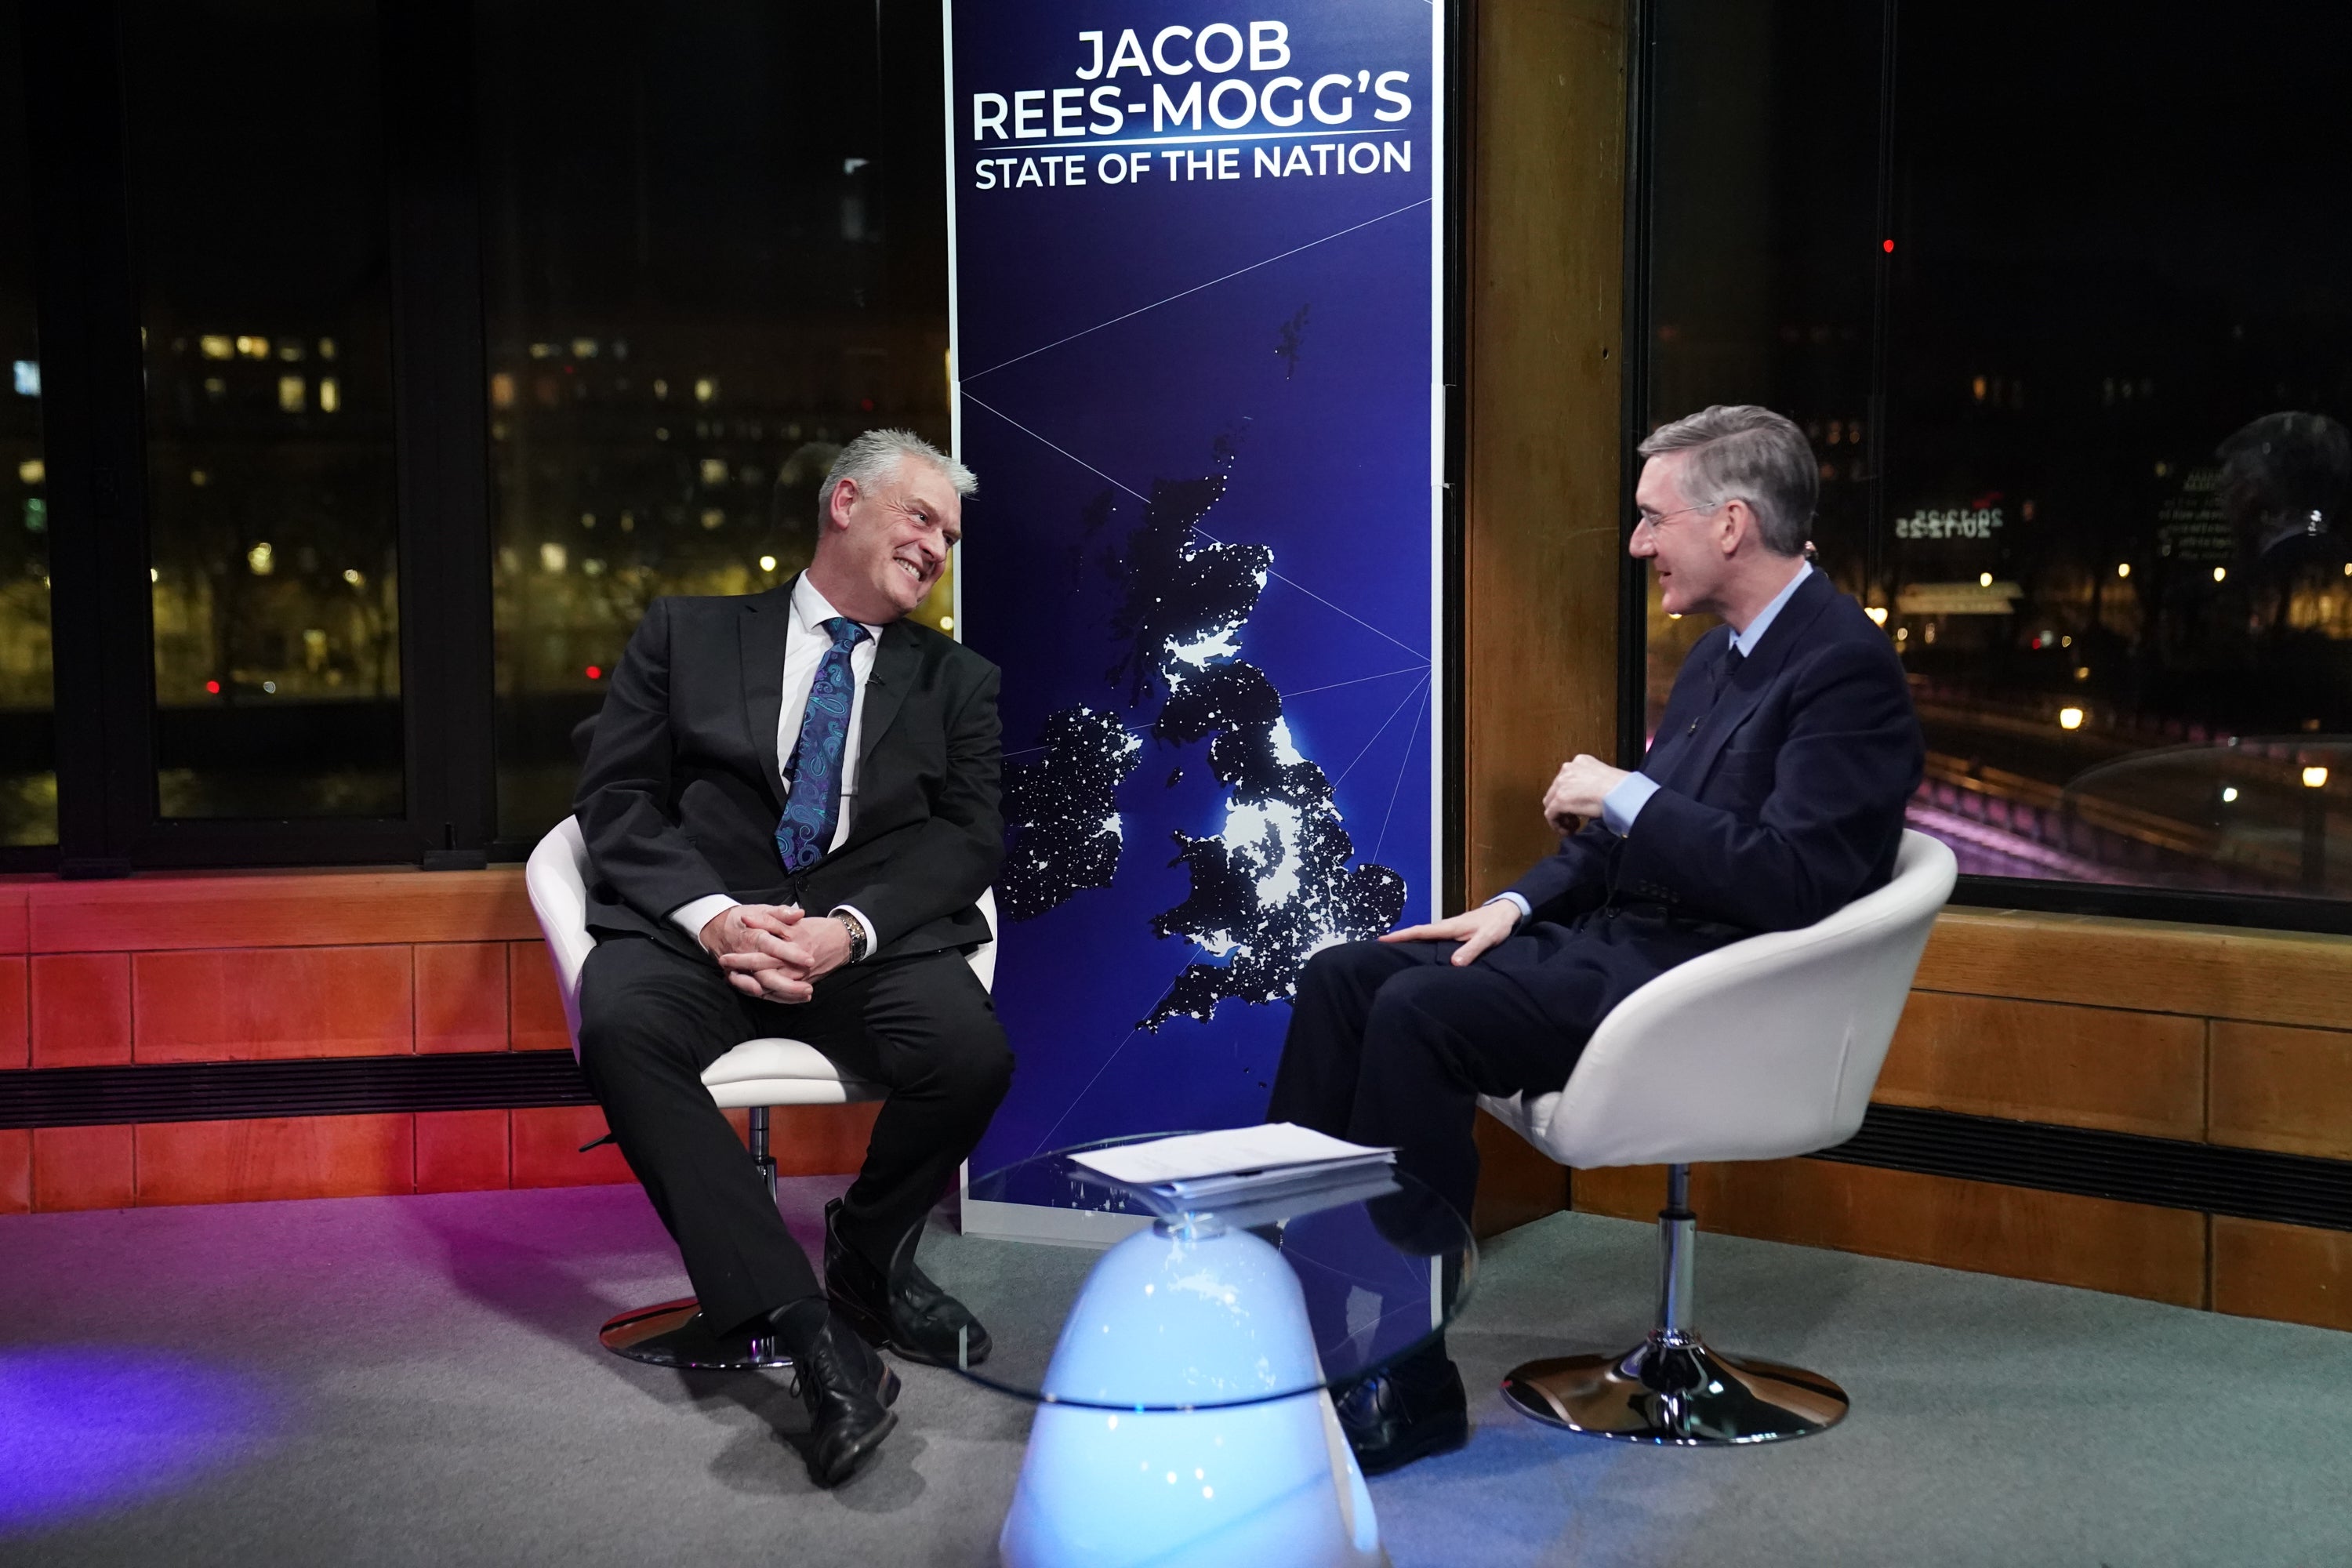 Lee Anderson talks to Jacob Rees-Mogg at GB News during Rees-Mogg’s show Jacob Rees-Mogg’s State of The Nation